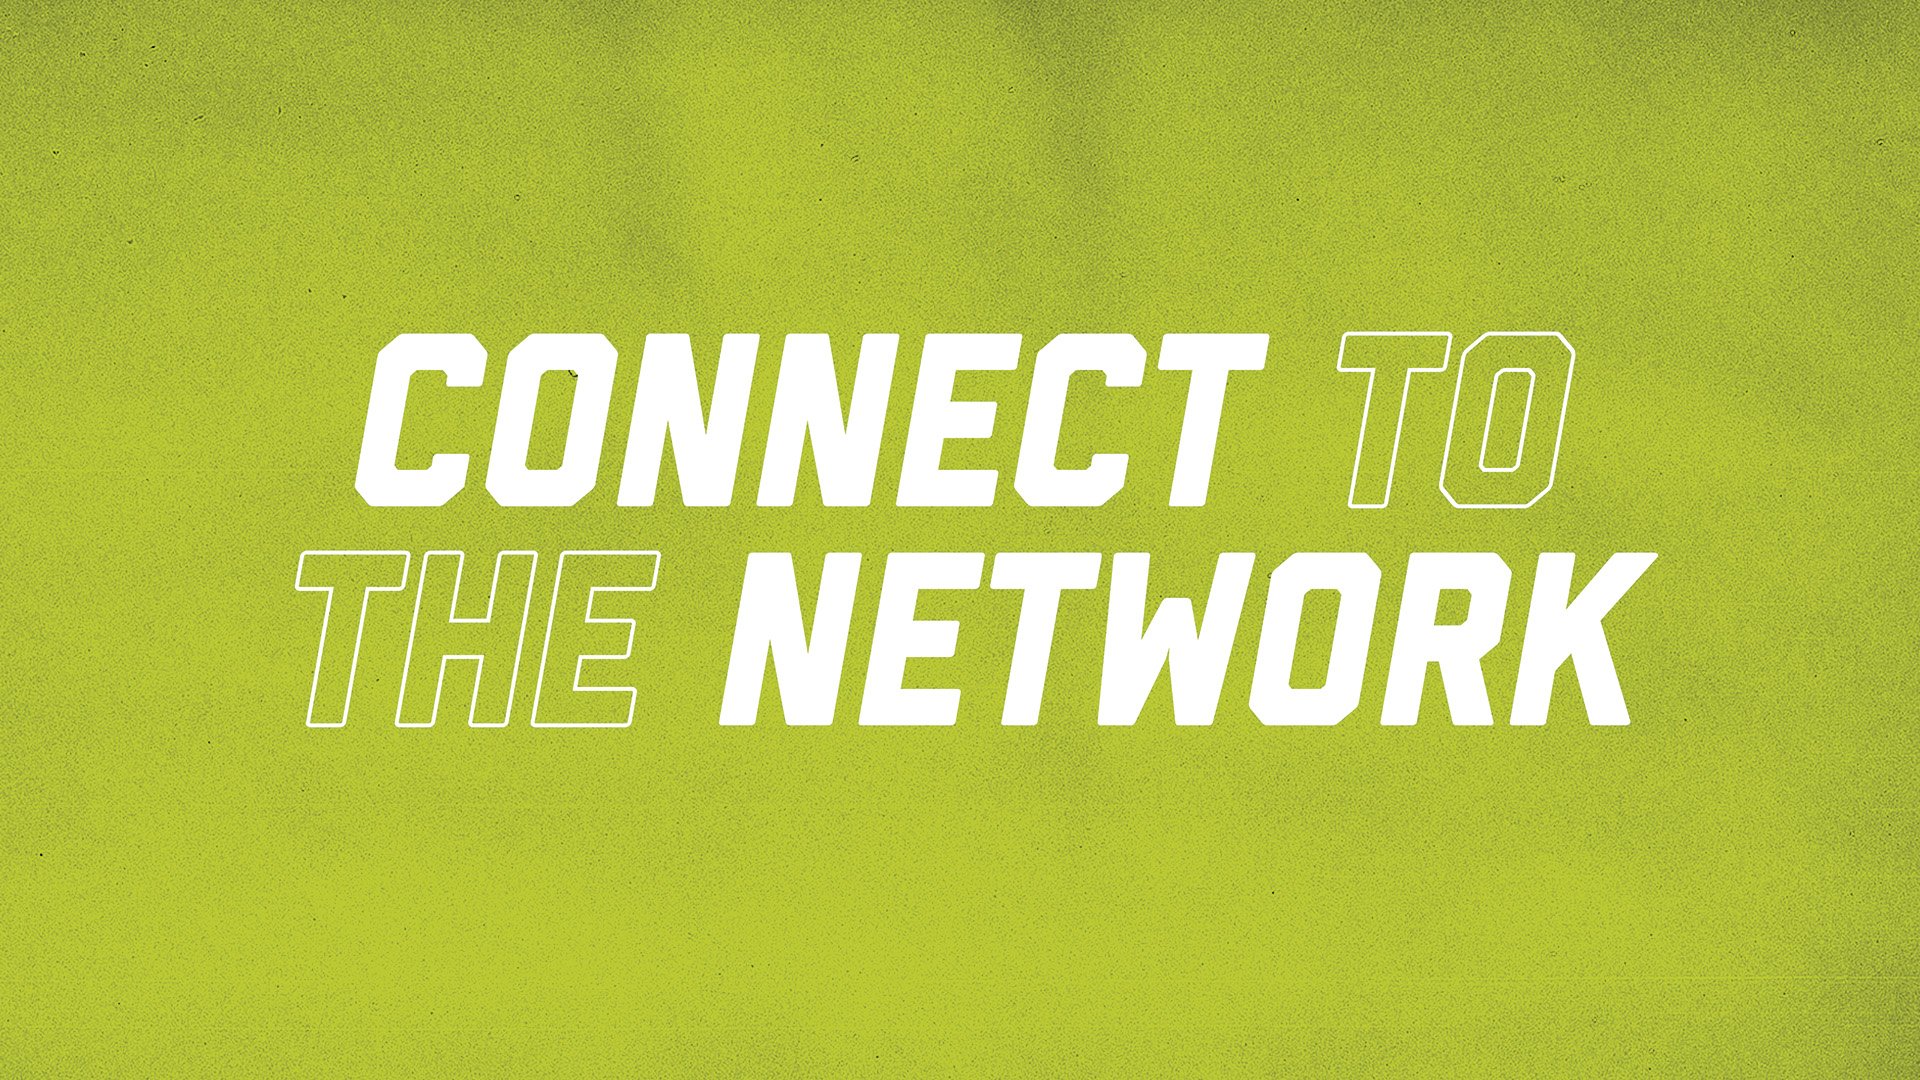 Connect to the Network